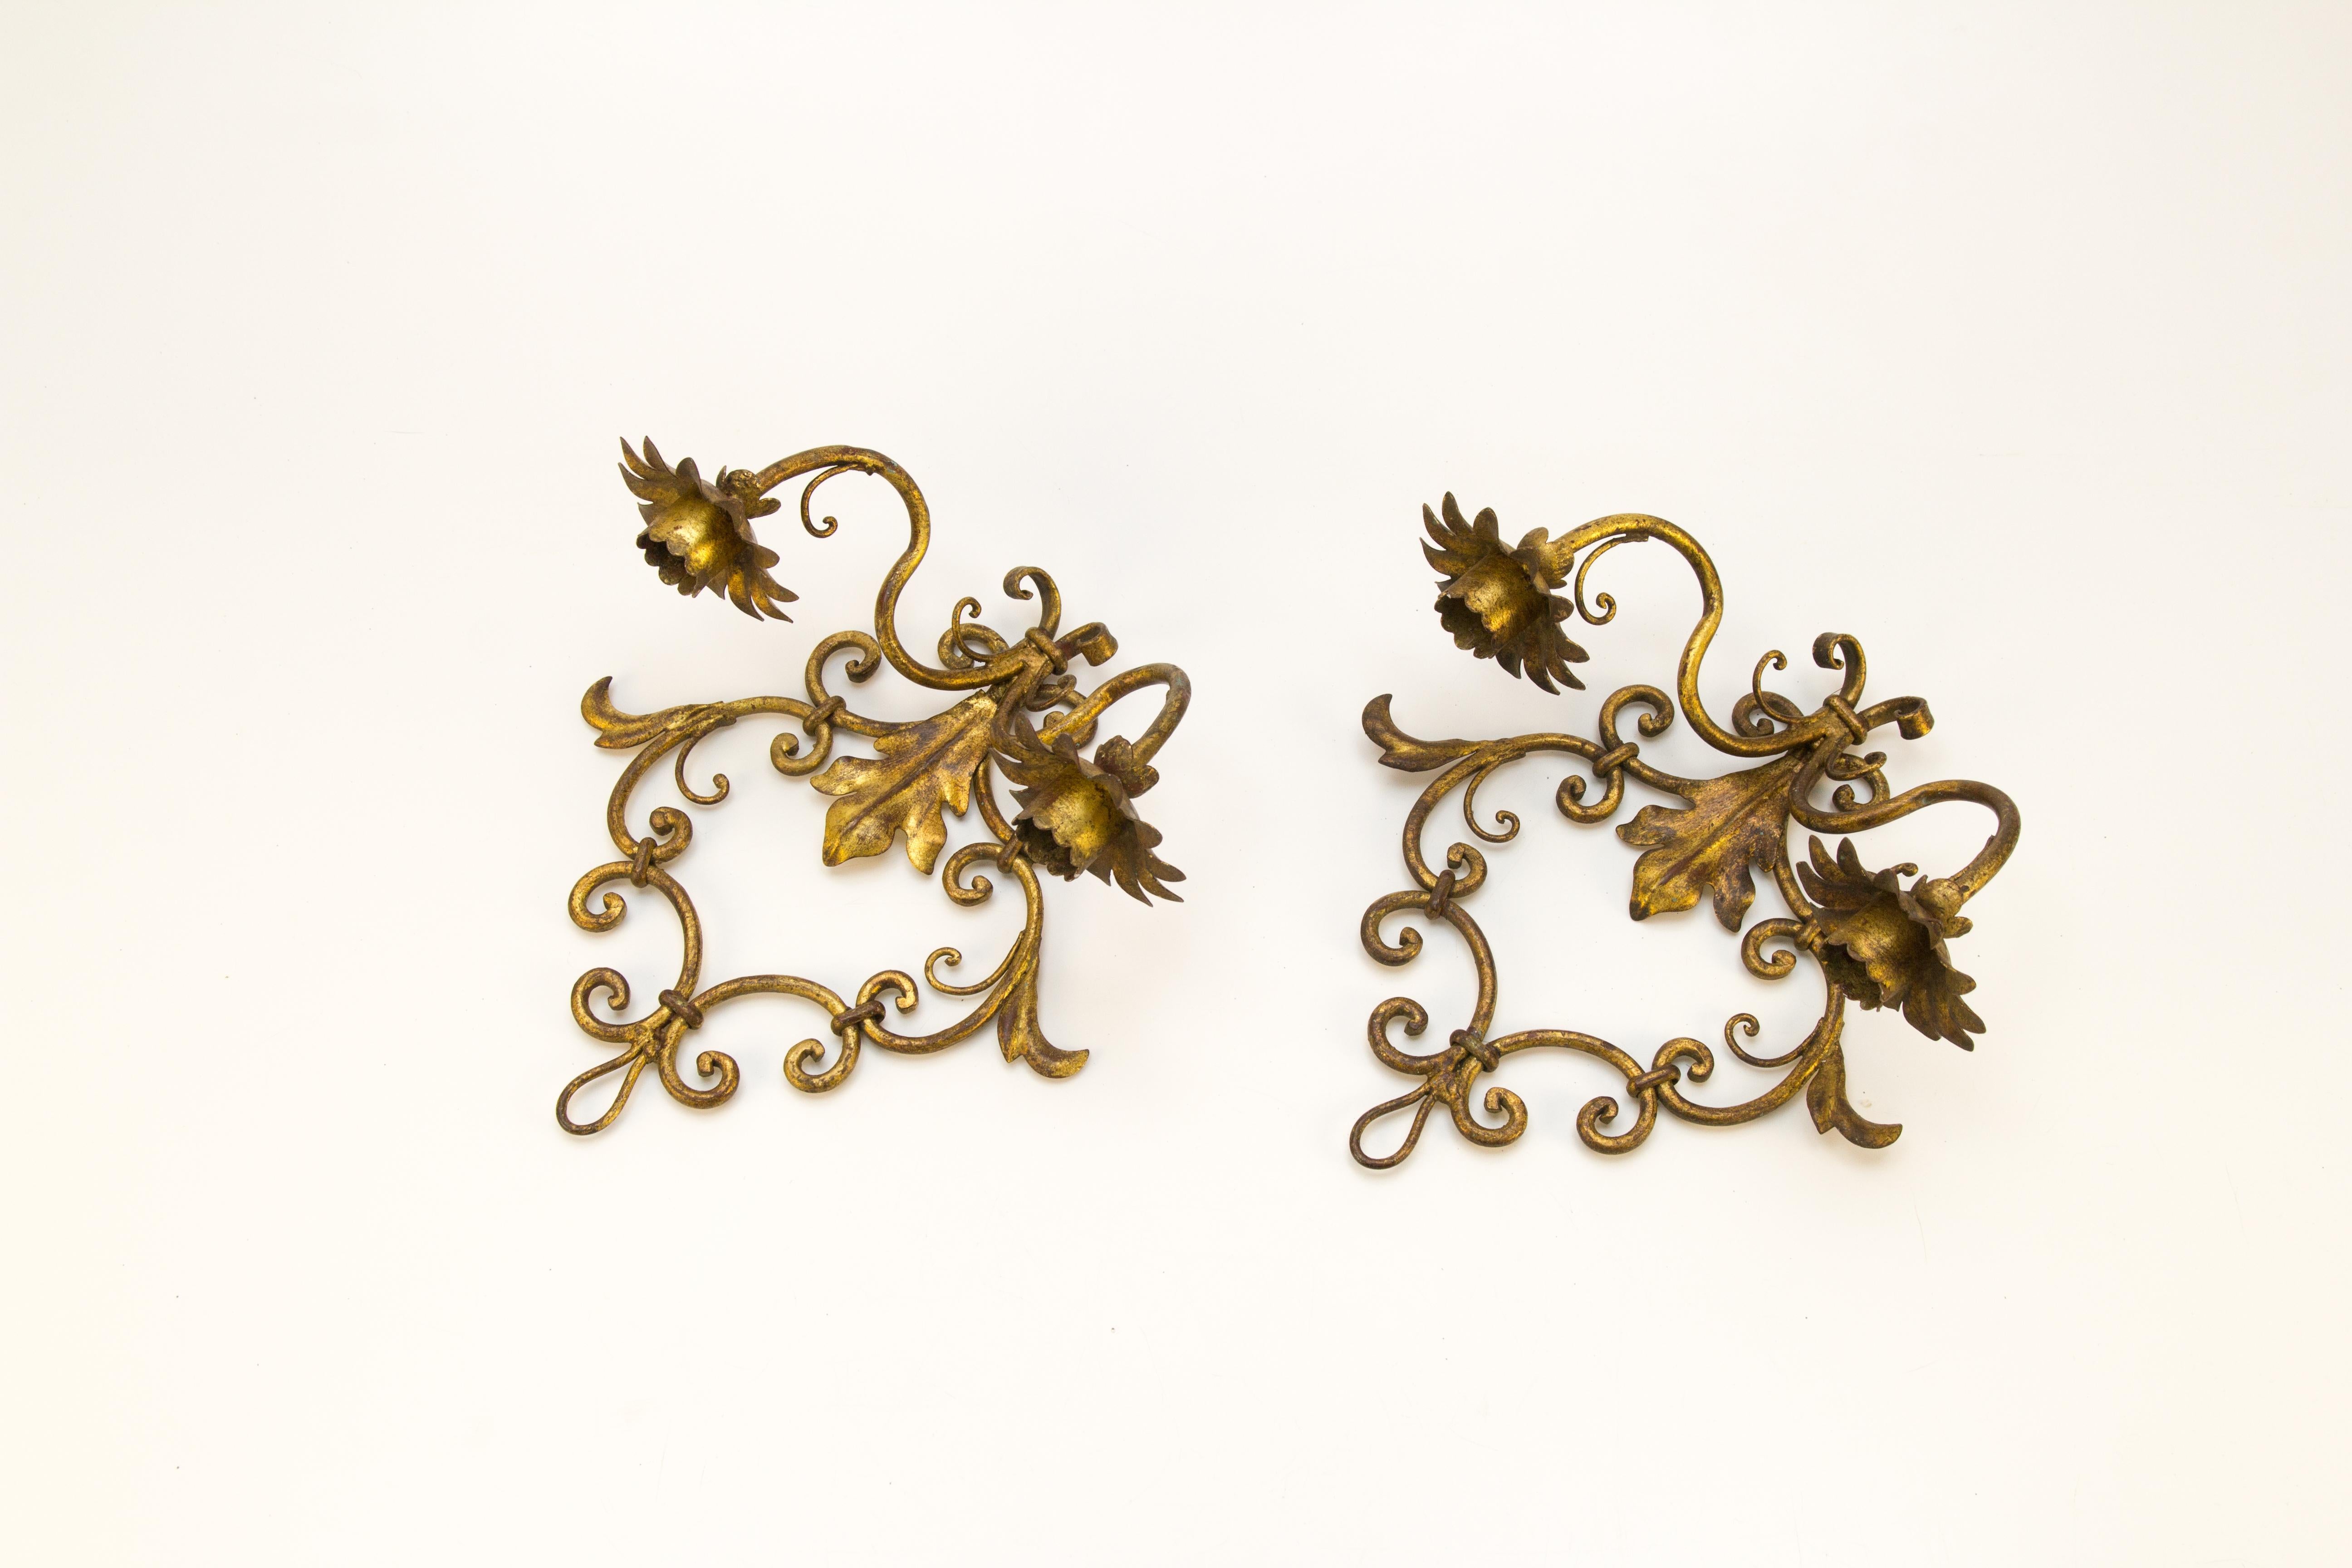 Pair of Italian Hollywood Regency Style Gilt Metal Candle Wall Sconces For Sale 3